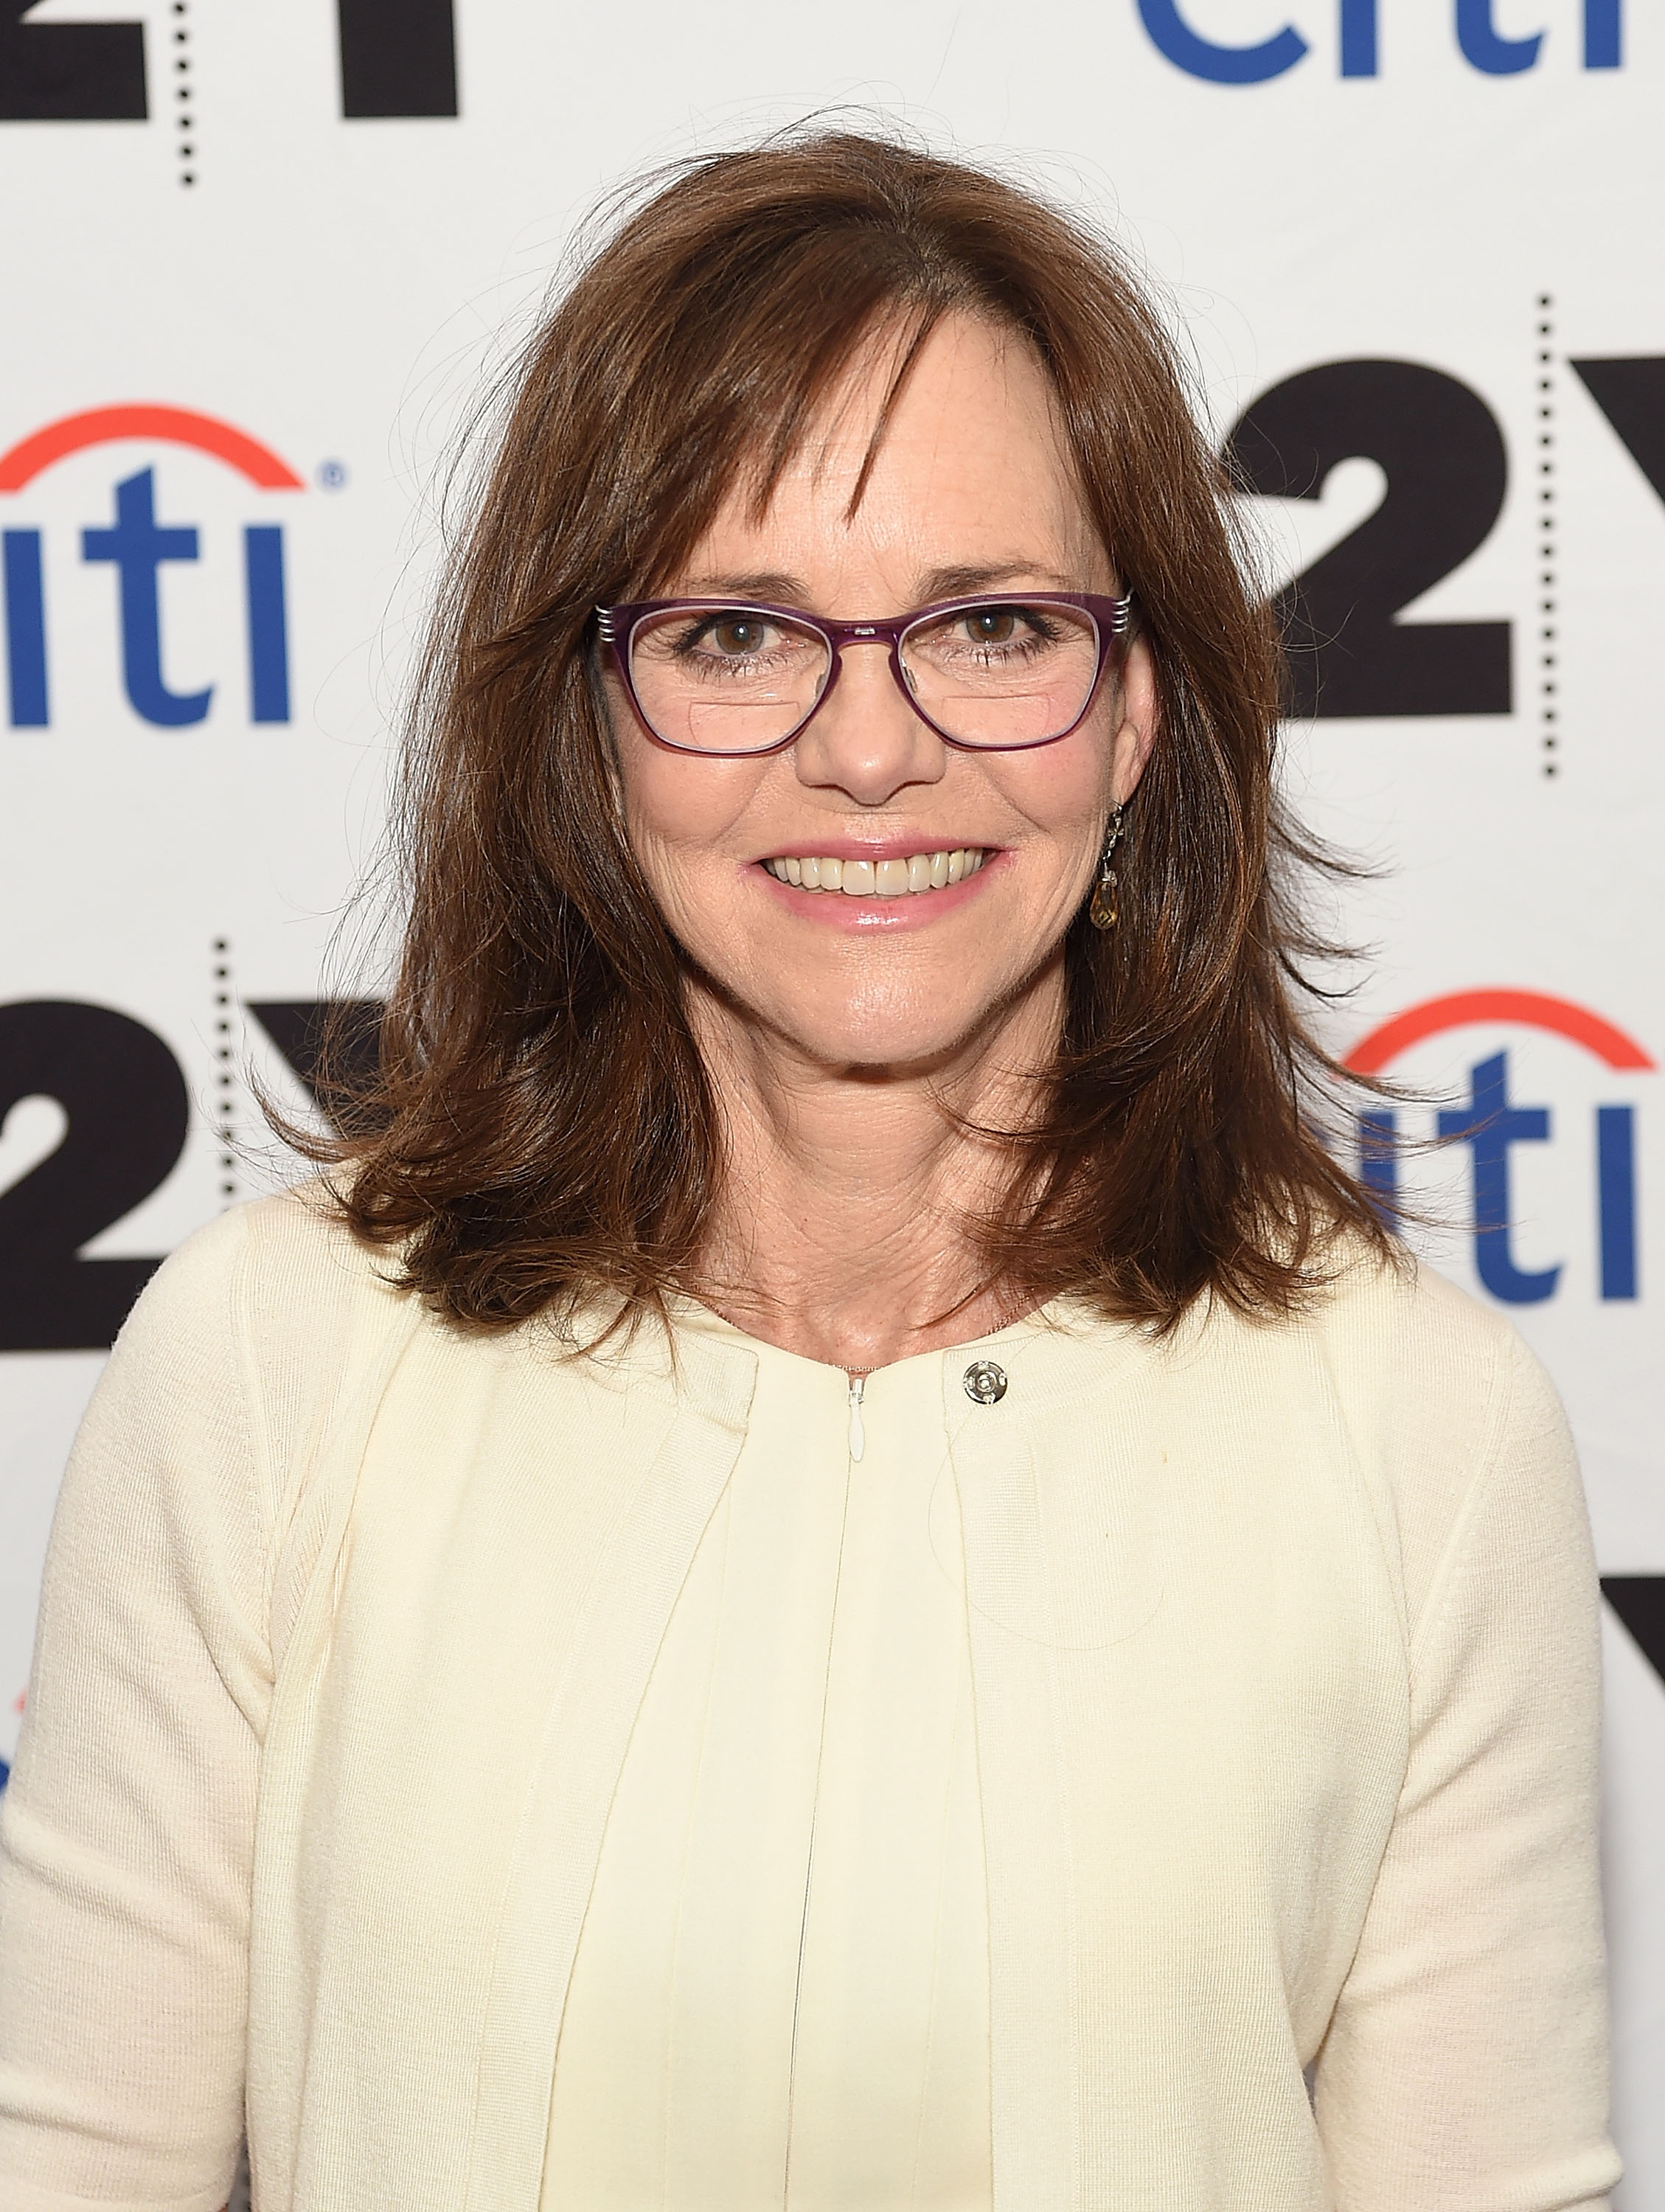 Sally Field during "Sally Field In Conversation With Cynthia McFadden" at New York. | Source: Getty Images